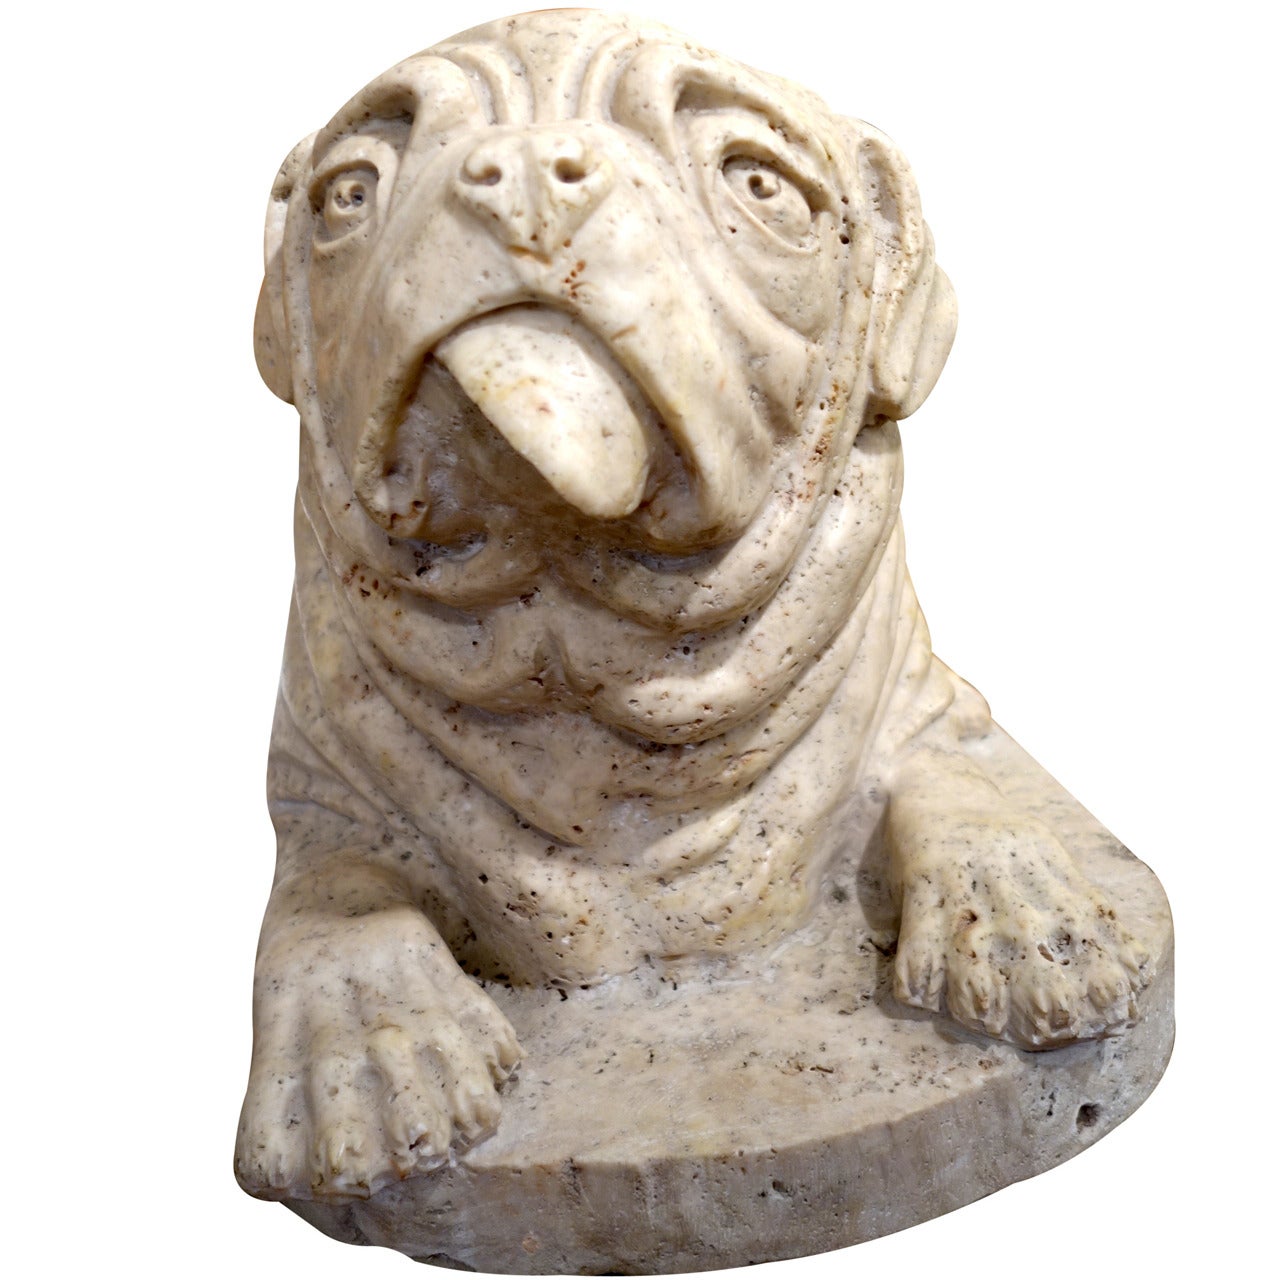 Solid Marble Carving of a Bulldog or Pug Dog with Character